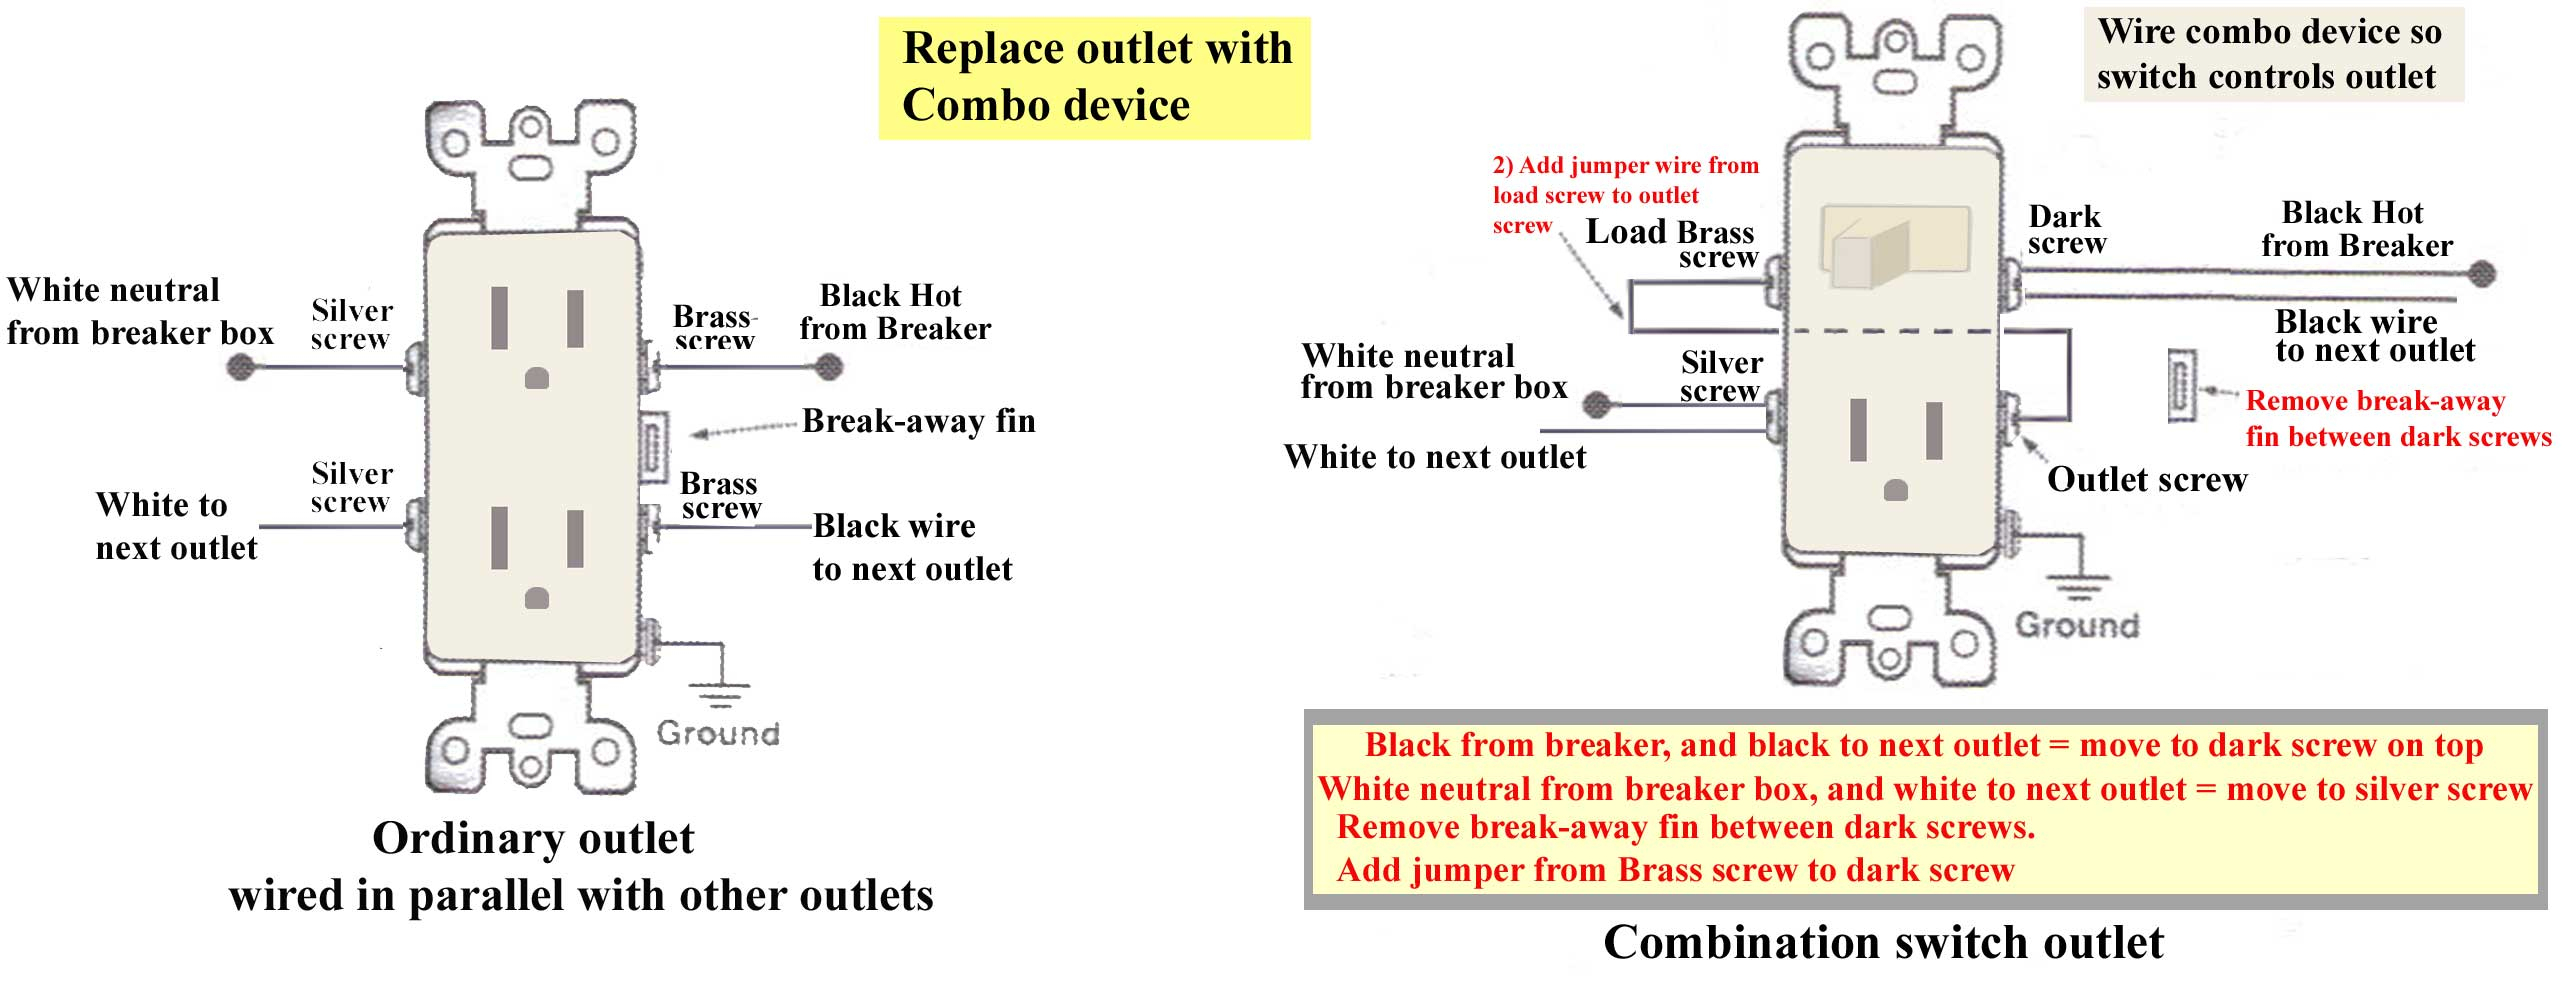 How To Wire Combination Switch Outlet - Switch Outlet Wiring Diagram